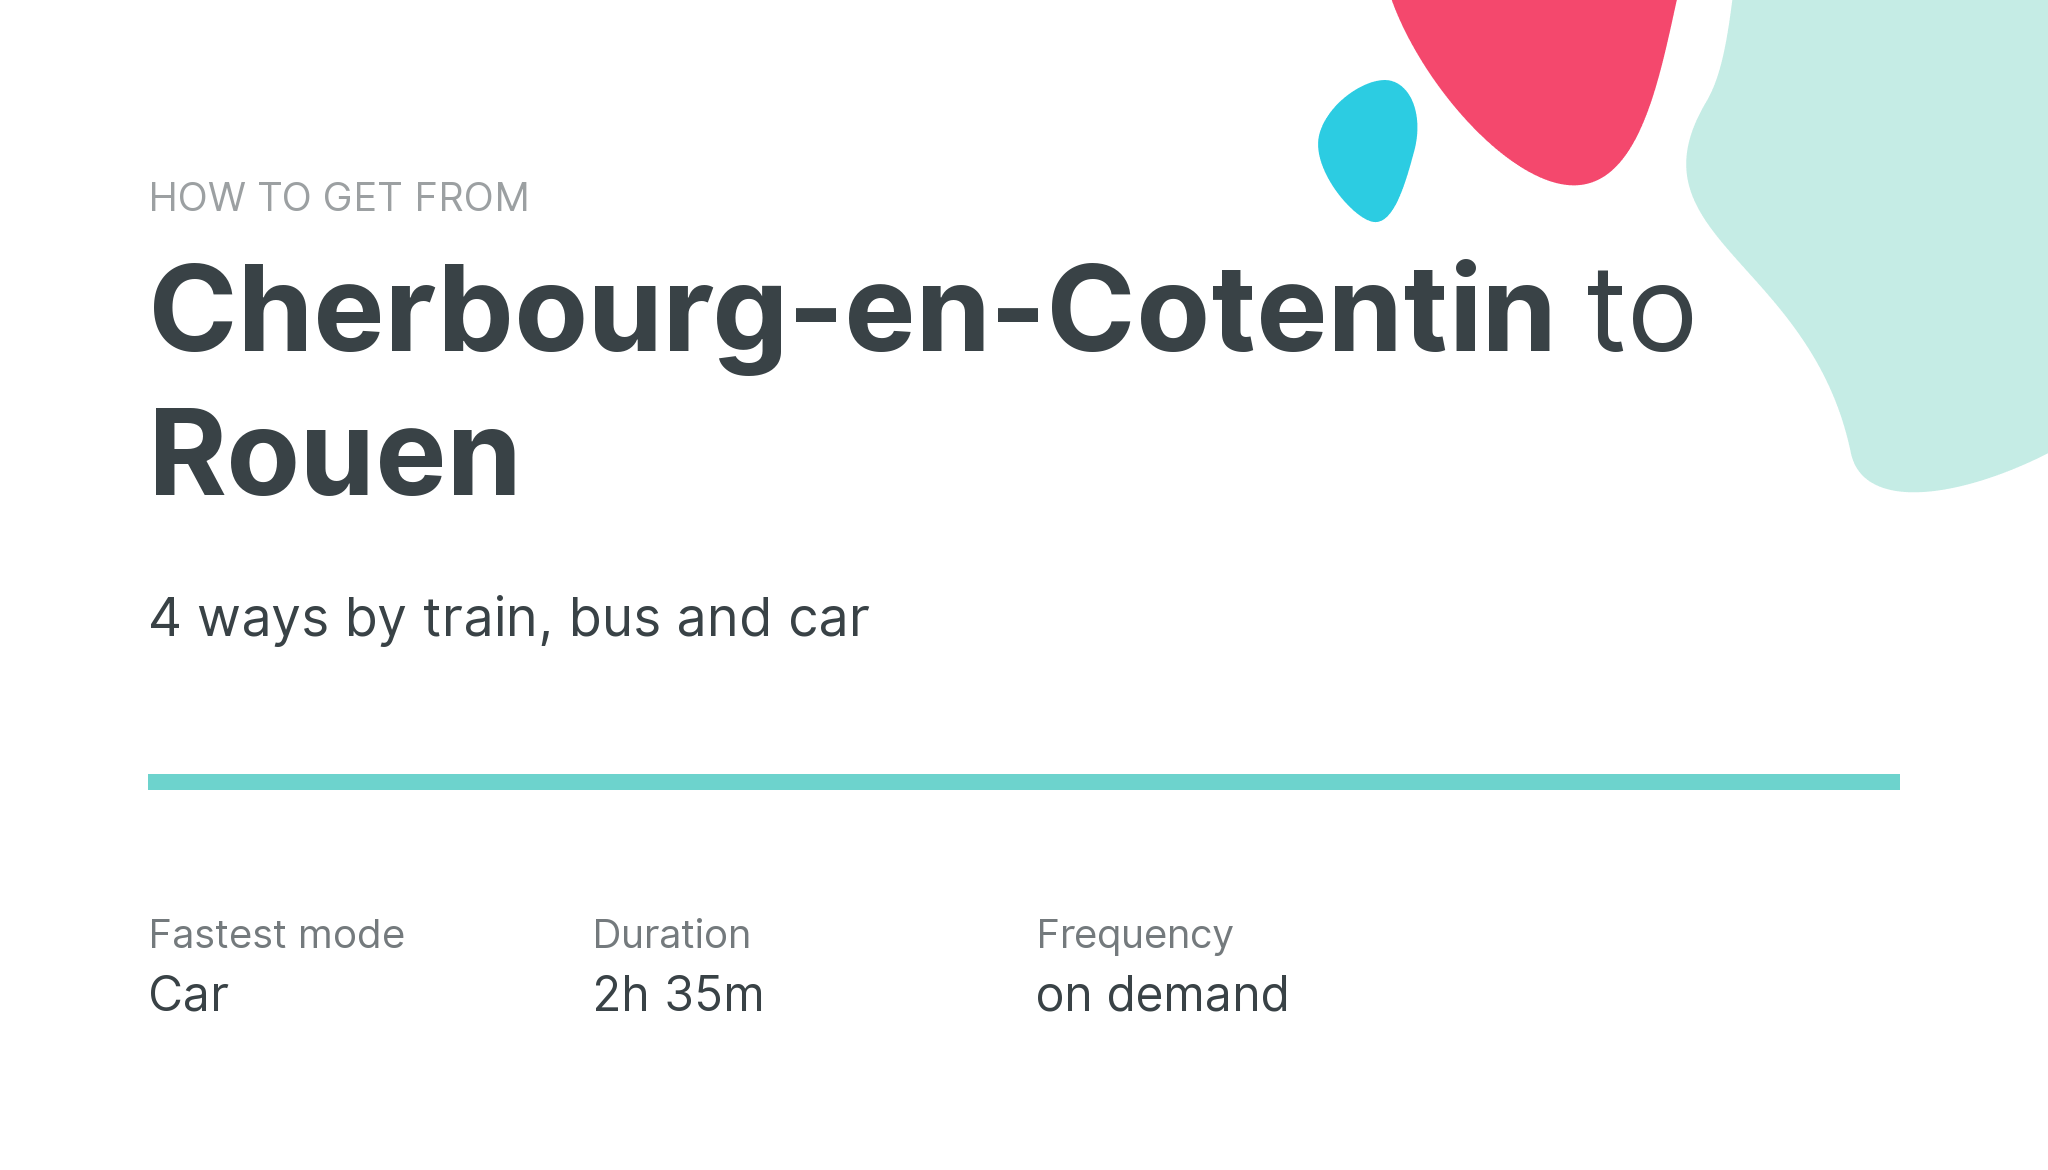 How do I get from Cherbourg-en-Cotentin to Rouen